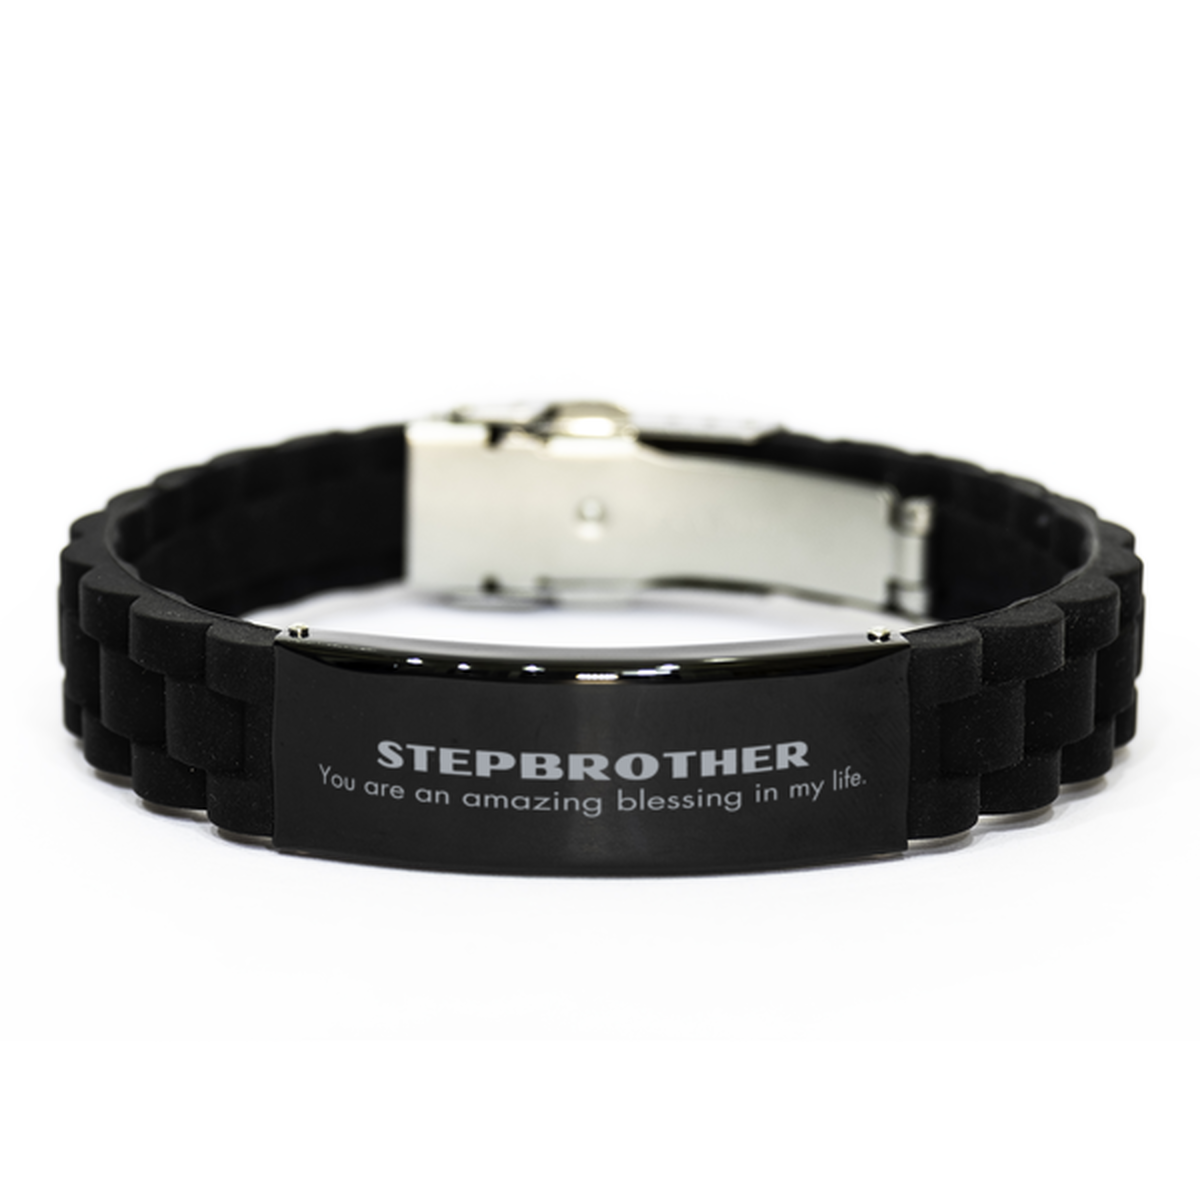 Stepbrother Black Glidelock Clasp Bracelet, You are an amazing blessing in my life, Thank You Gifts For Stepbrother, Inspirational Birthday Christmas Unique Gifts For Stepbrother